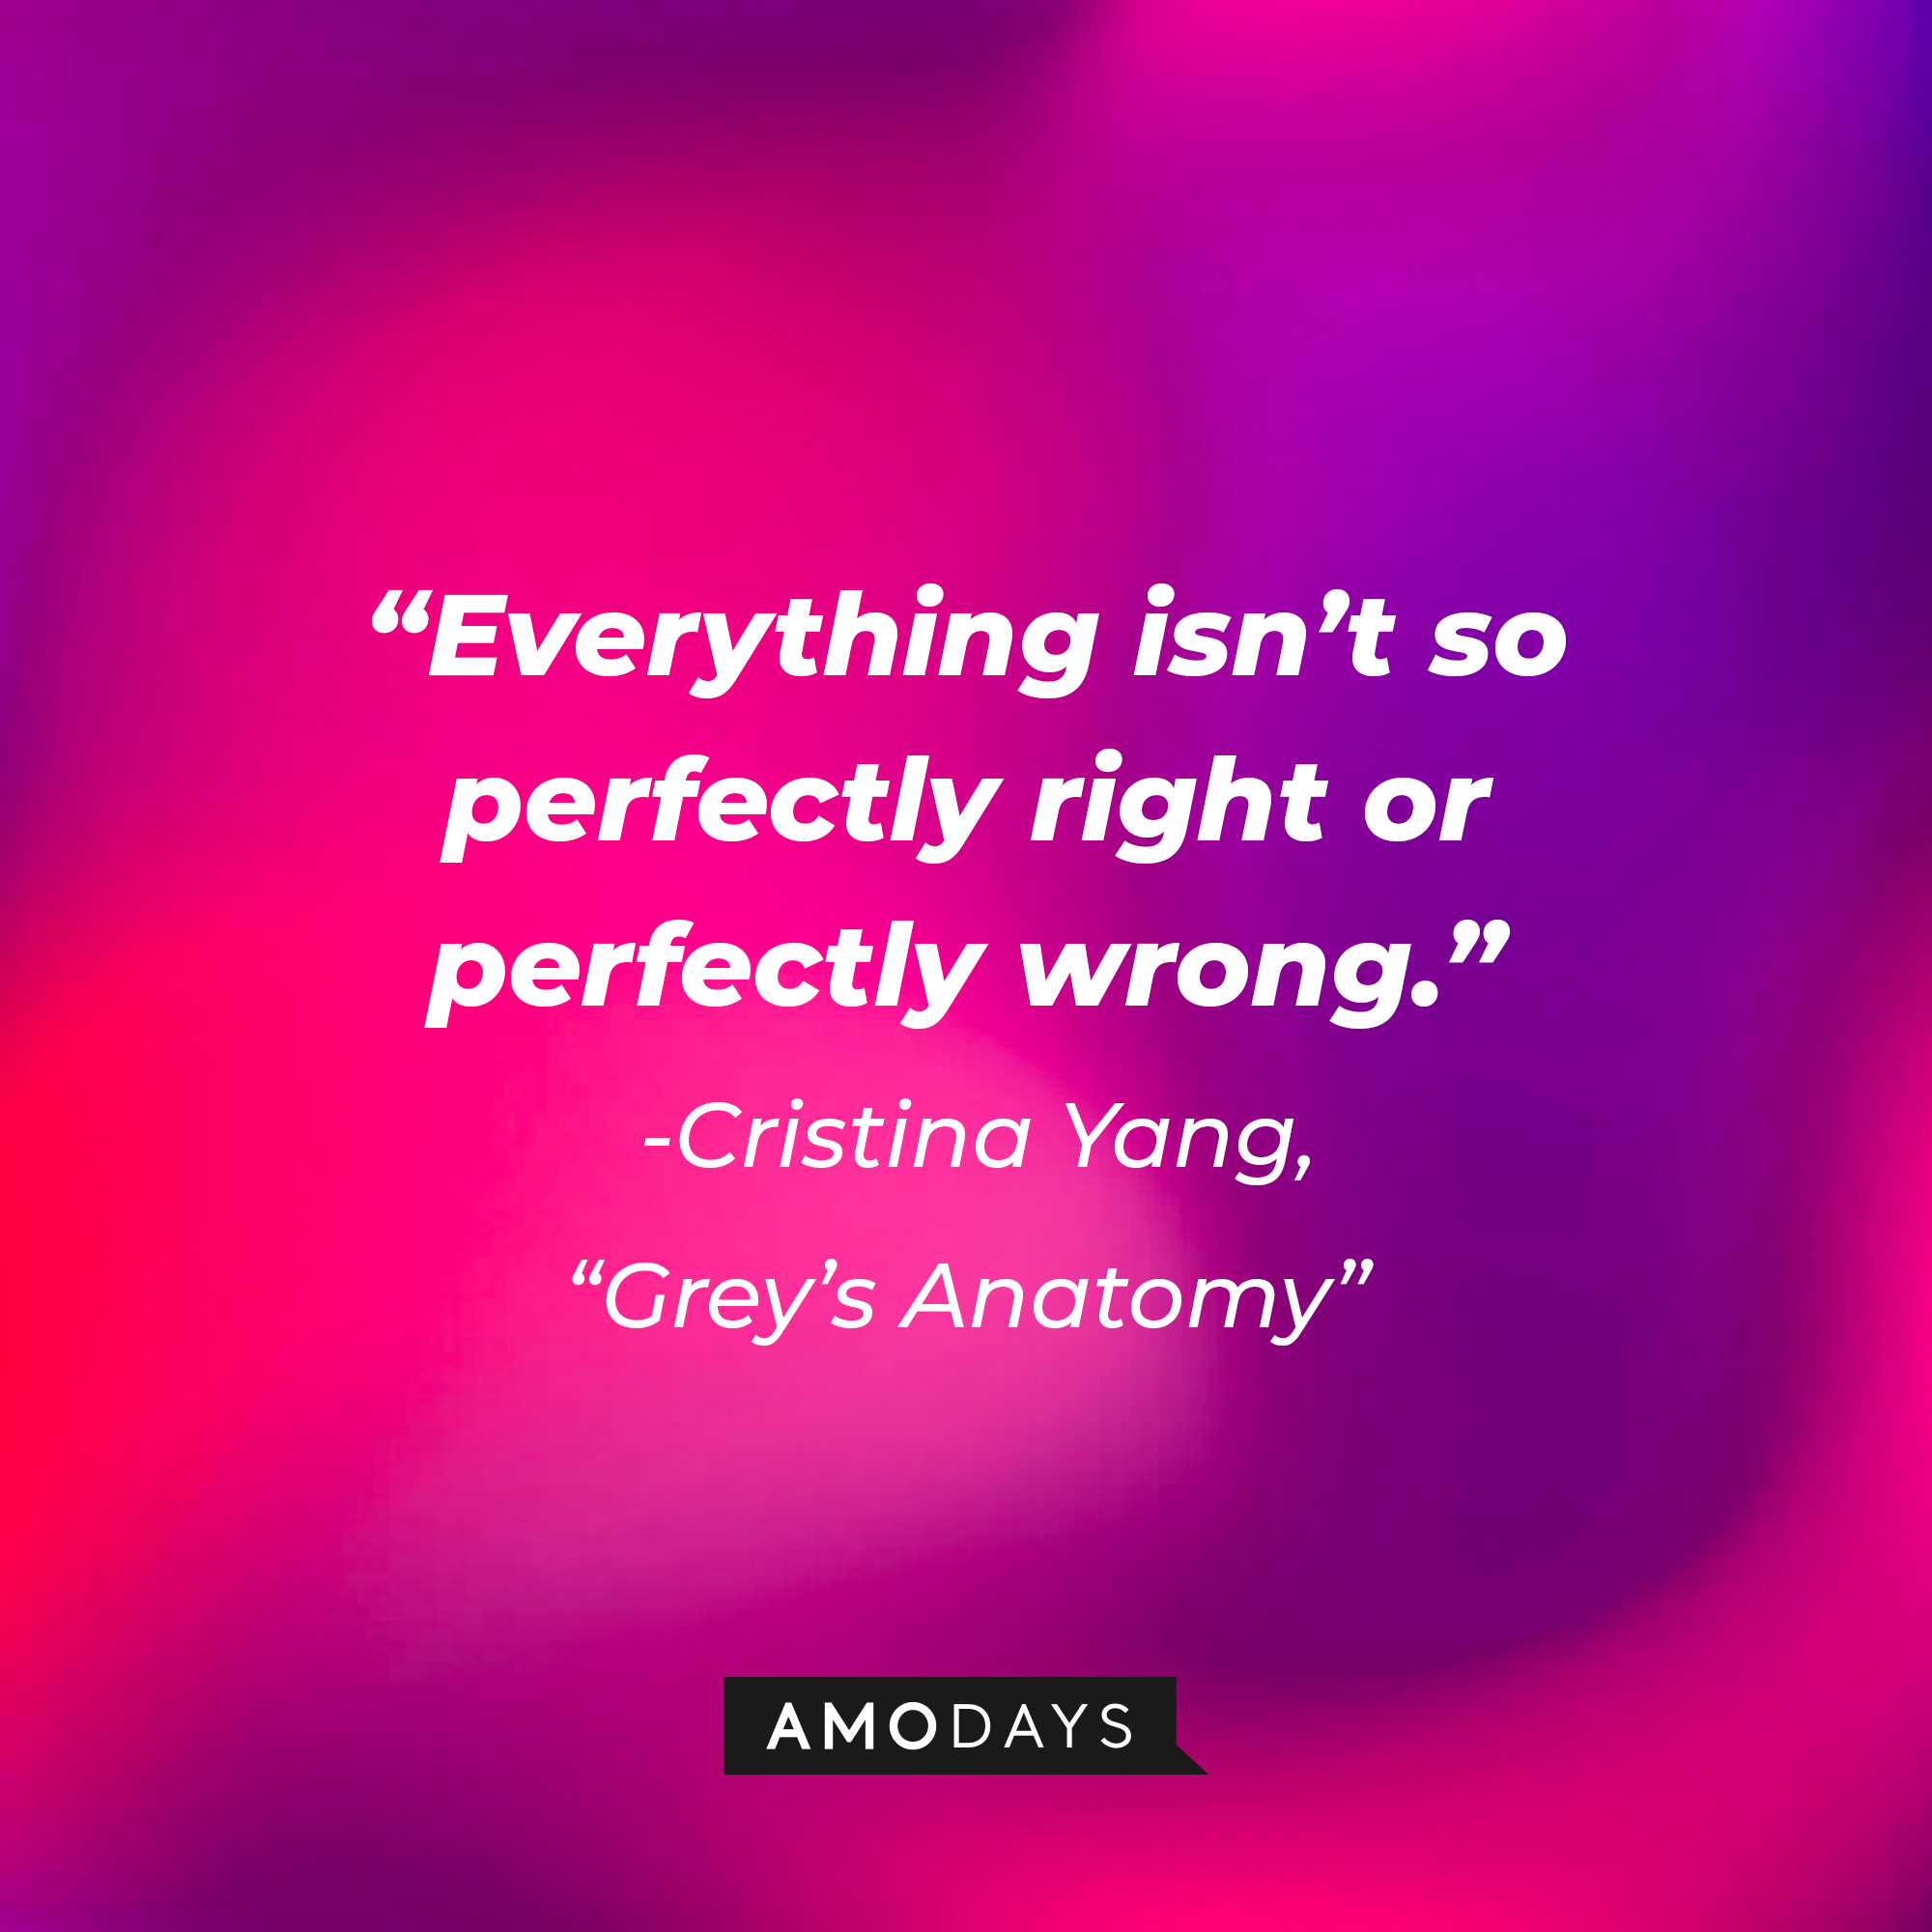 Cristina Yang's quote on "Grey's Anatomy:" “Everything isn’t so perfectly right or perfectly wrong.” | Source: AmoDays